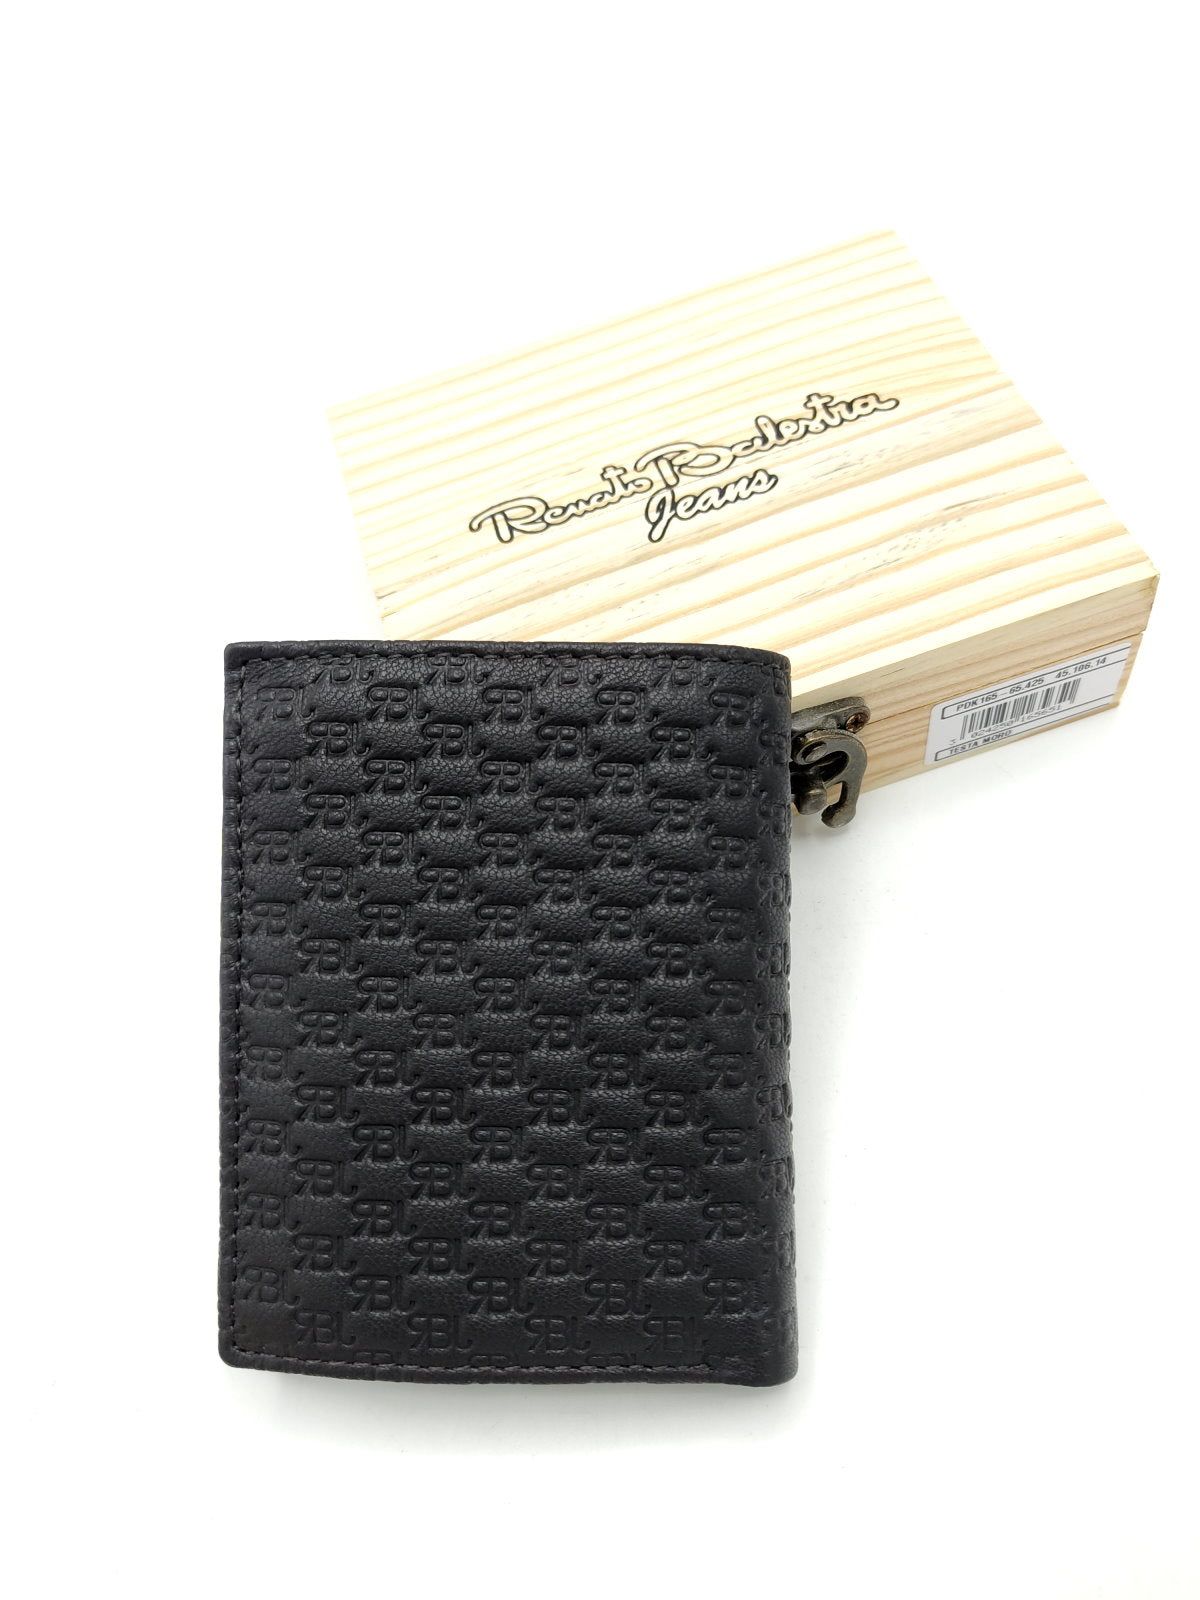 Genuine leather wallet for Men, Brand Renato Balestra Jeans, with wooden box, art. PDK165-65.425